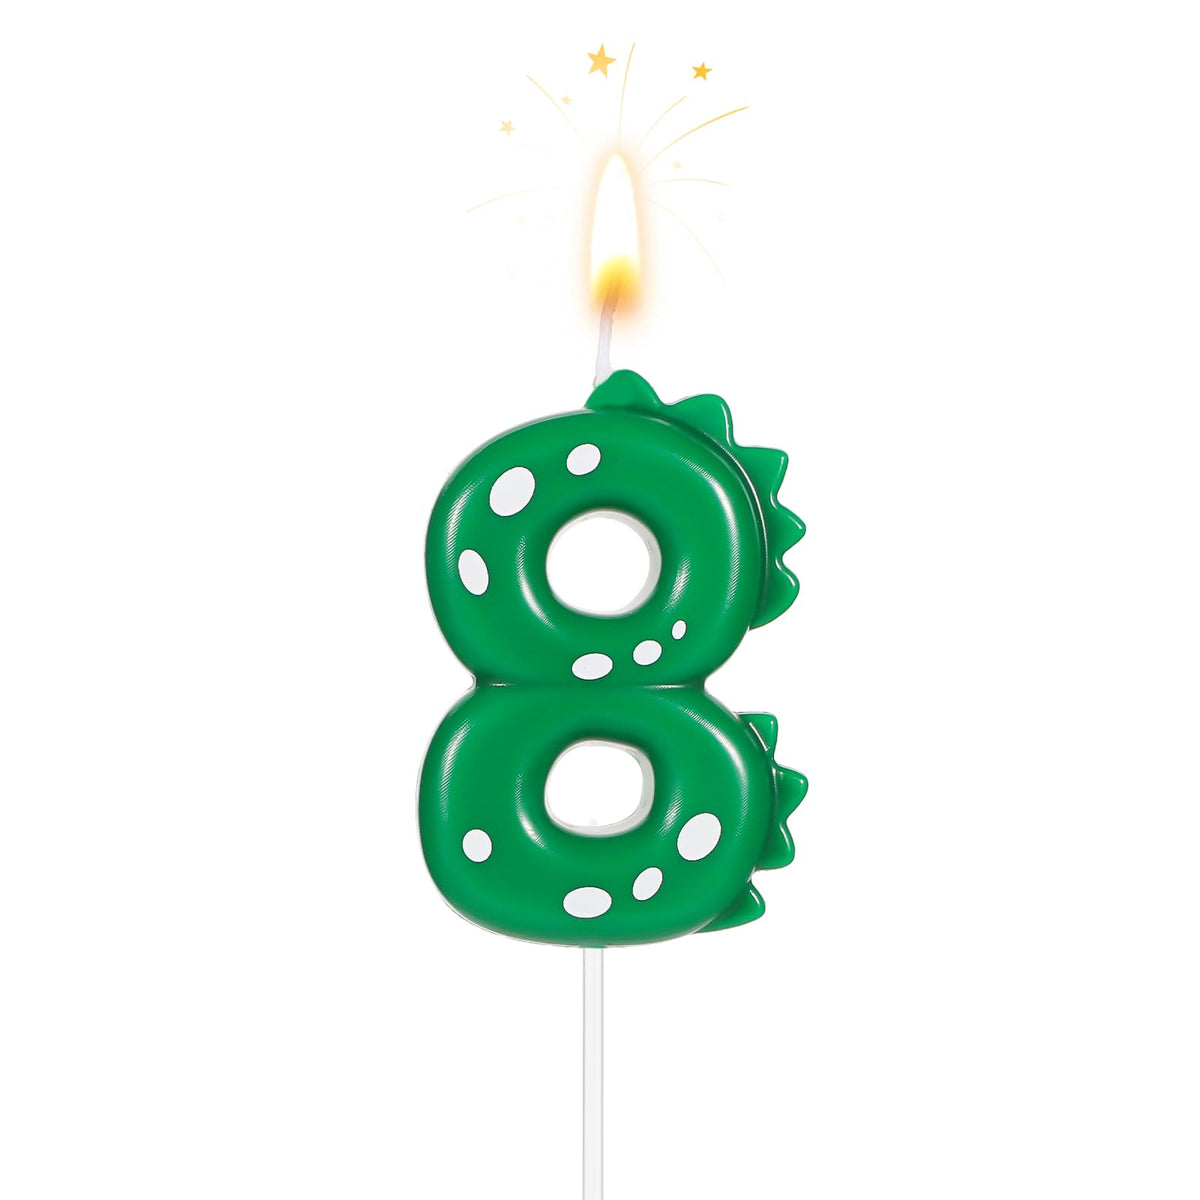 TOYMIS Birthday Number Candles, 2.8 Inch Dinosaur Candle Birthday Cake Candles Dinosaur Birthday Candle for Cake Dinosaur Candle Theme Party Decoration(Number 8)